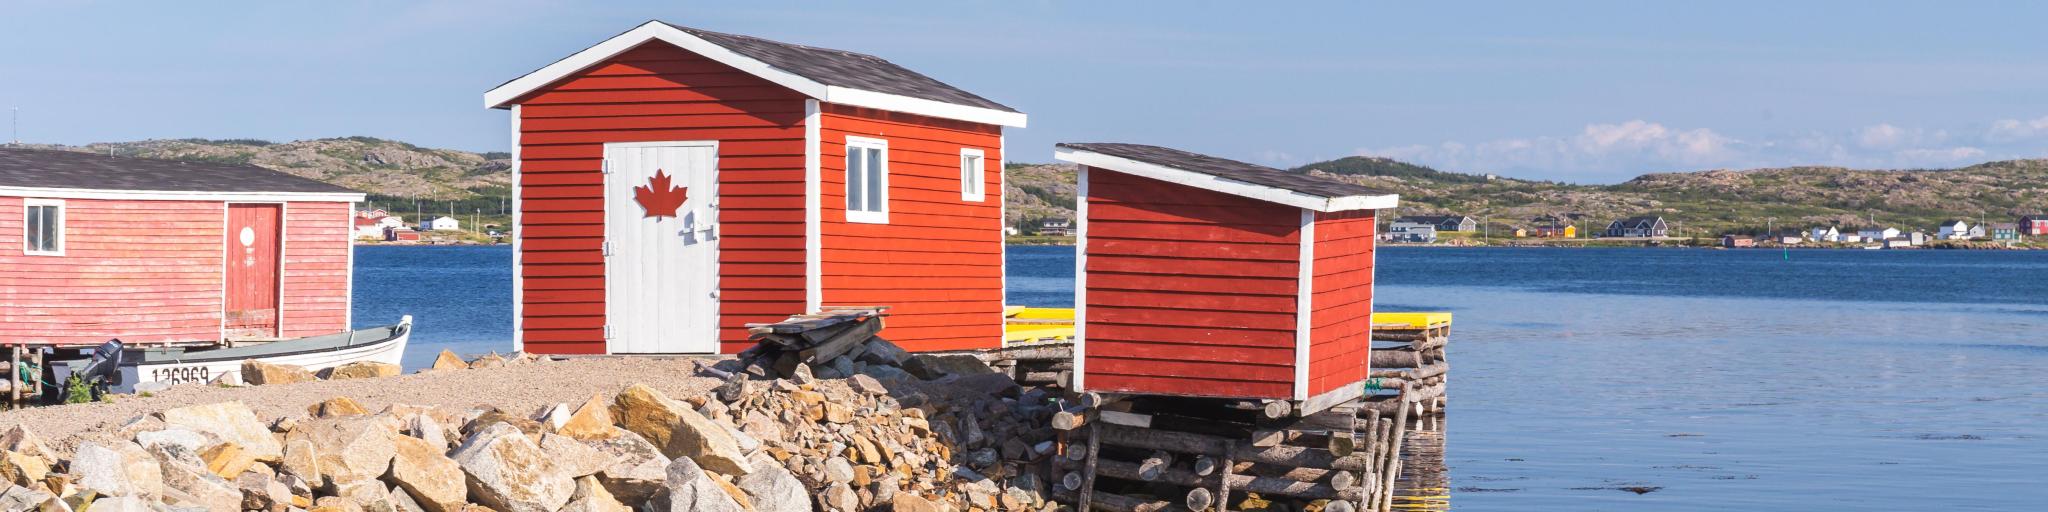 The fishing village of Tilting, Fogo Island,with two red cabins on the water